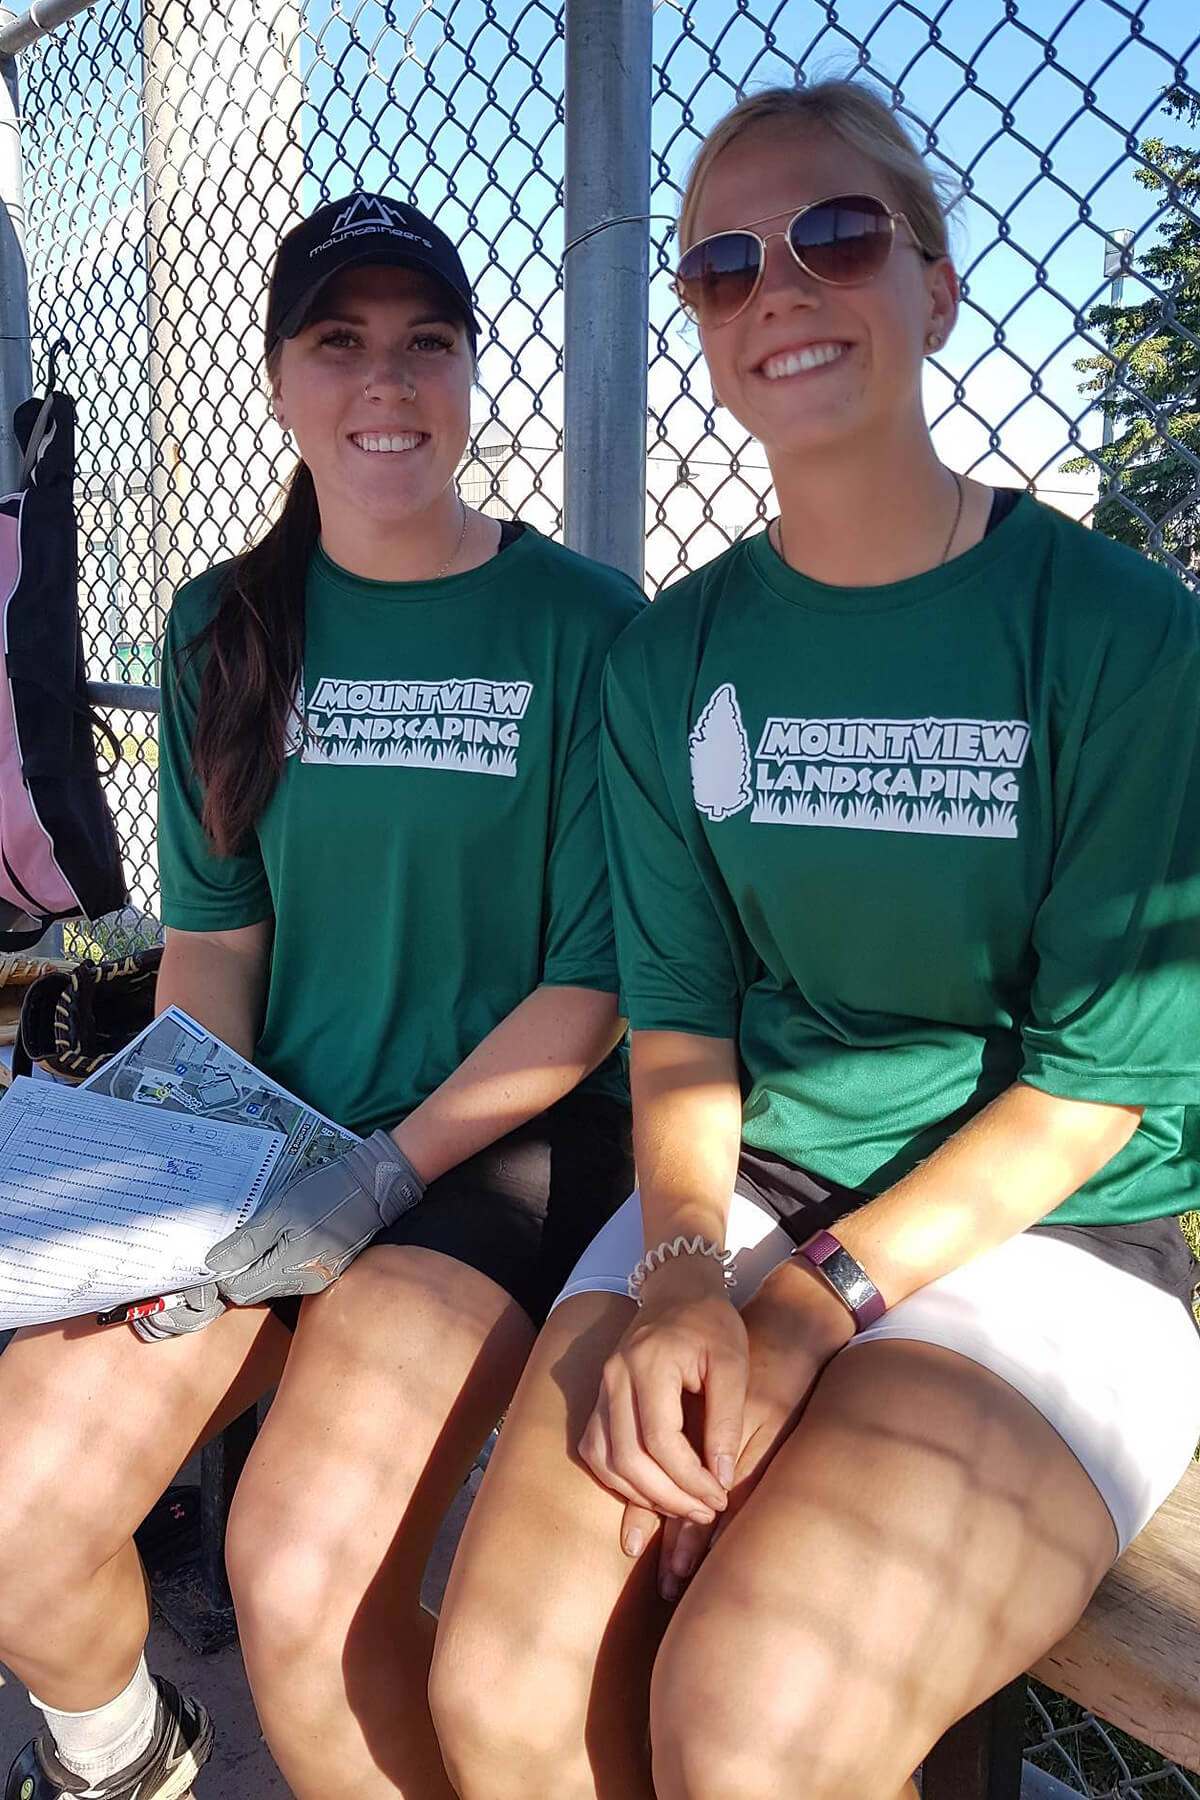 Two happy girls sitting on baseball dugout bench